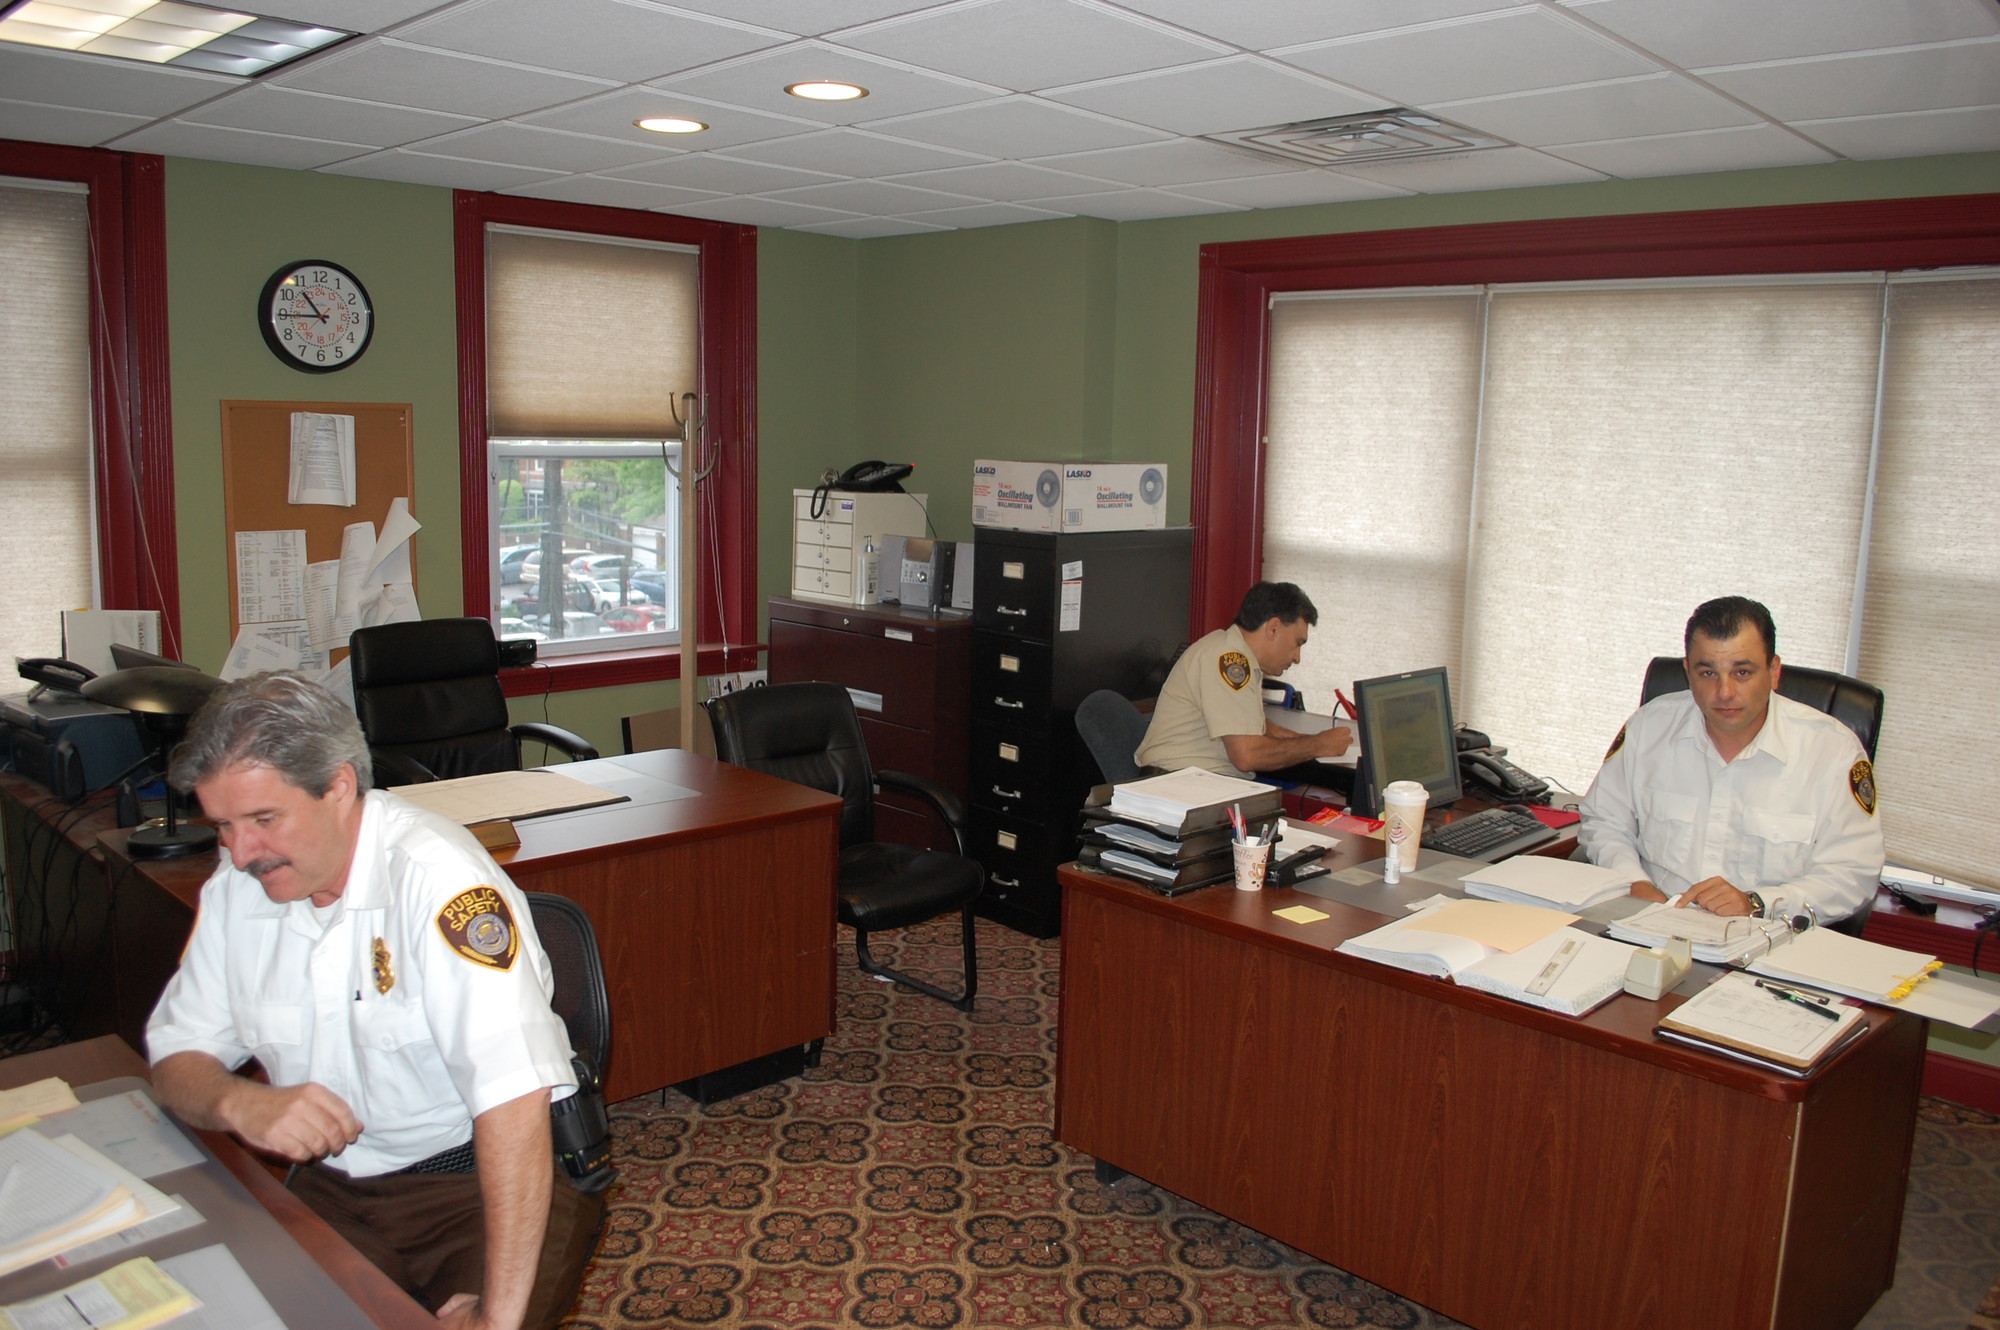 Public Safety officers in their new space at 195 Rockaway Ave.